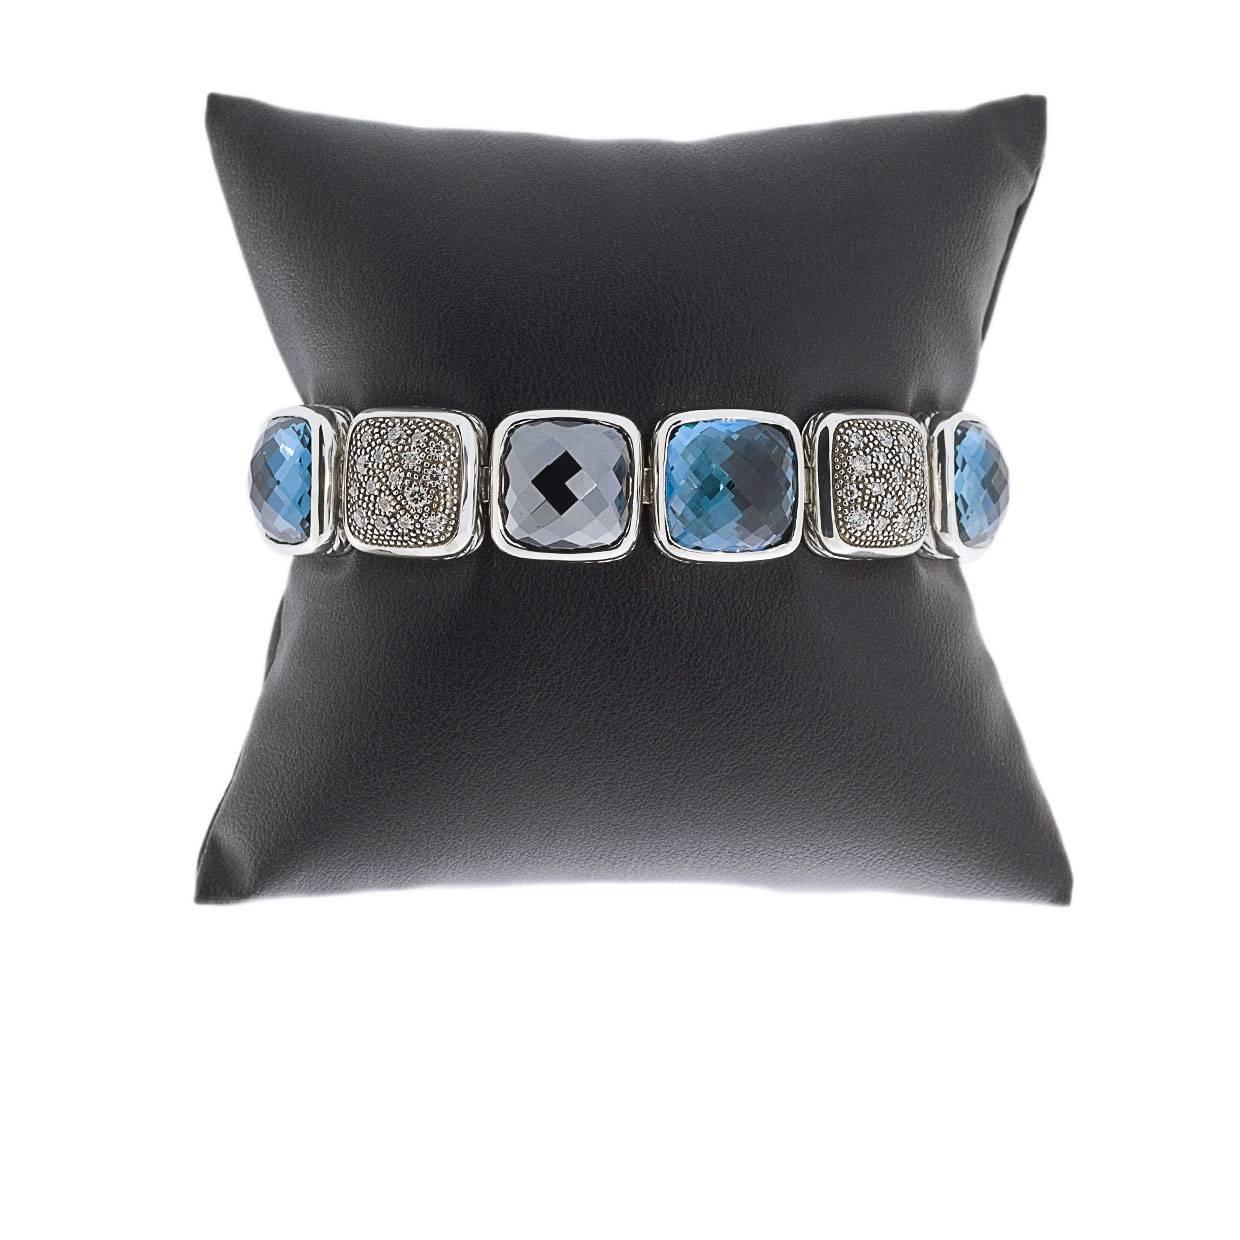 This beautiful David Yurman bracelet is from the Cushion on Point Collection. The bracelet features three cushion cut square blue topaz gemstones and two black cushion cut square hematite gemstones measuring 12 x 12 mm. 

Two squares of the bracelet